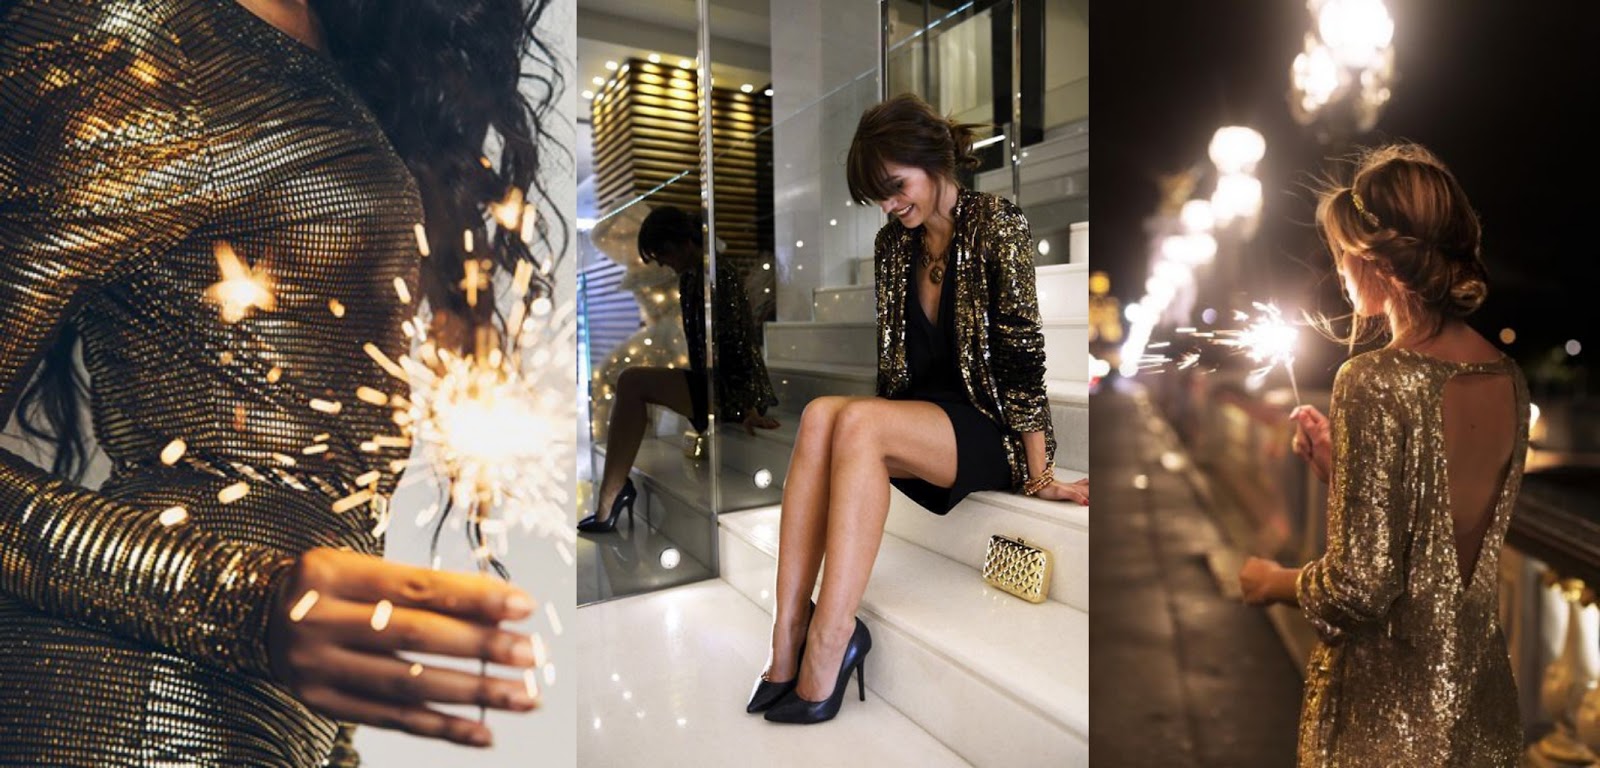 NEW YEAR'S EVE OUTFITS IDEAS  - KARINA MUCHA